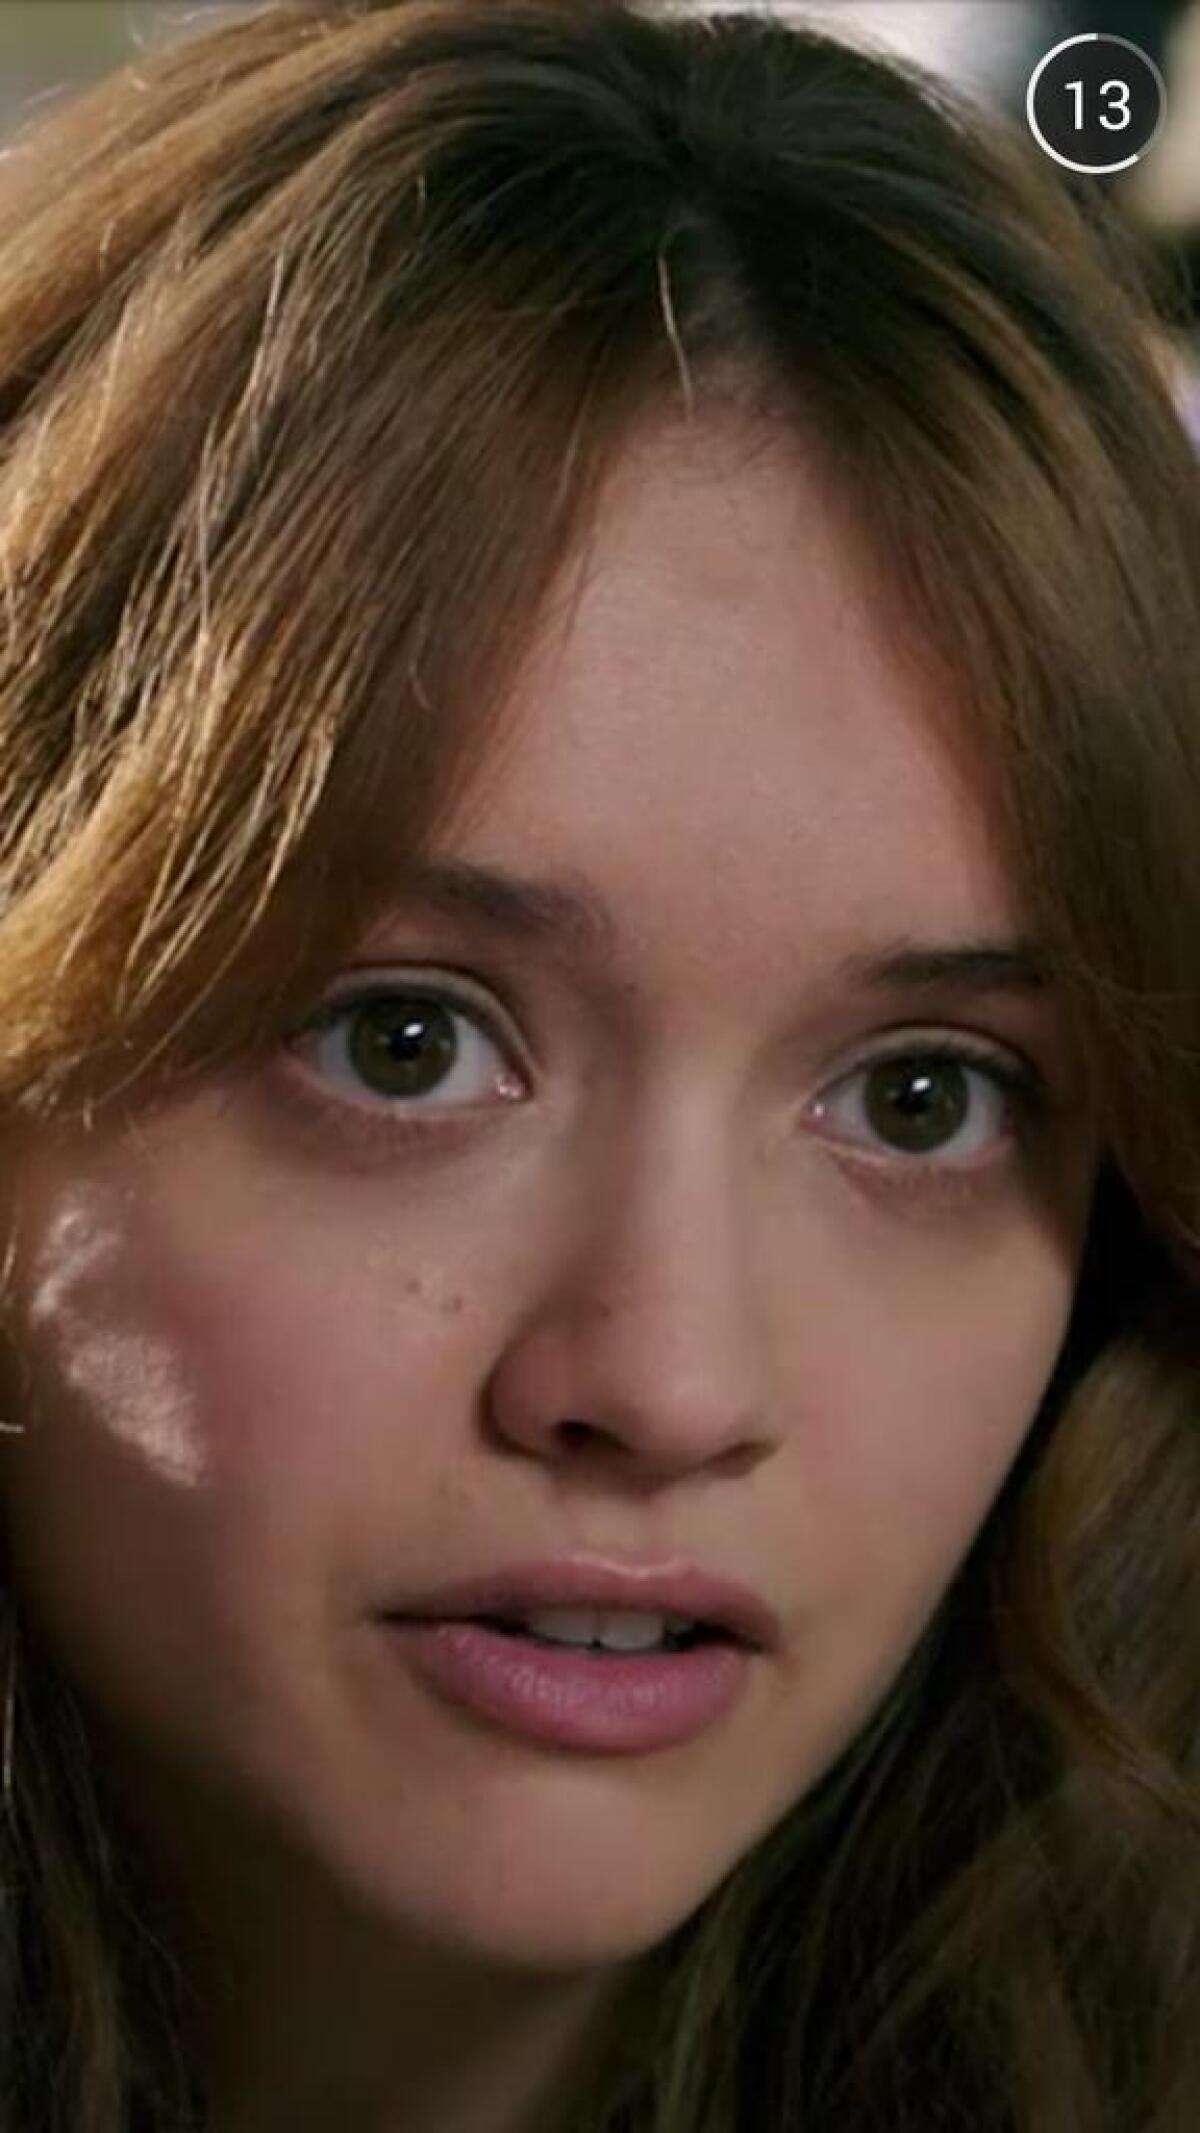 Actress Olivia Cooke is seen a trailer for the movie "Ouija" that users on Snapchat had a chance to voluntarily watch last weekend.